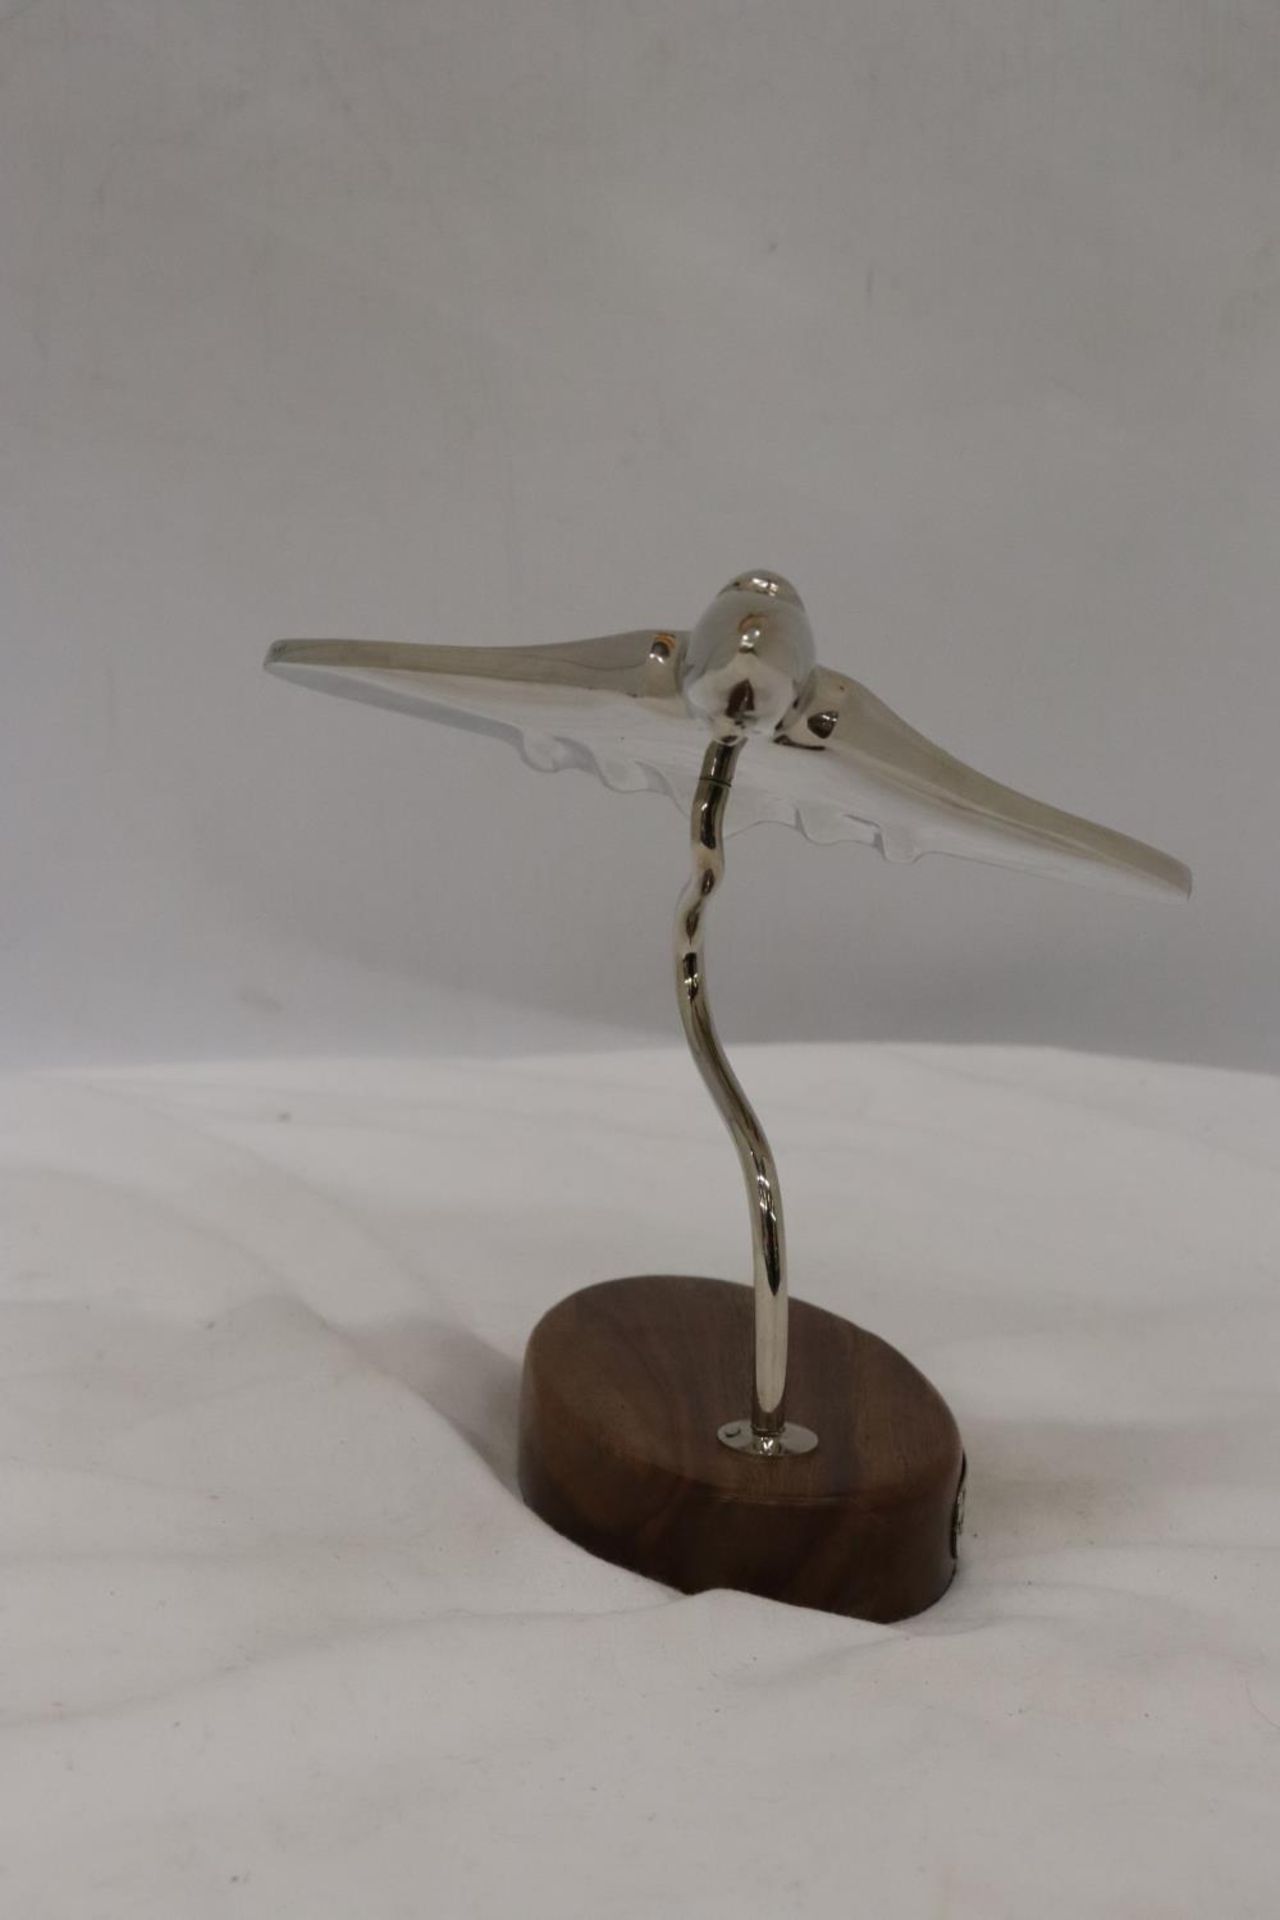 A CHROME MODEL OF AN AVRO VULCAN AEROPLANE ON A HARDWOOD BASE WITH HISTORY PLAQUE, HEIGHT 20 CM - Image 4 of 6